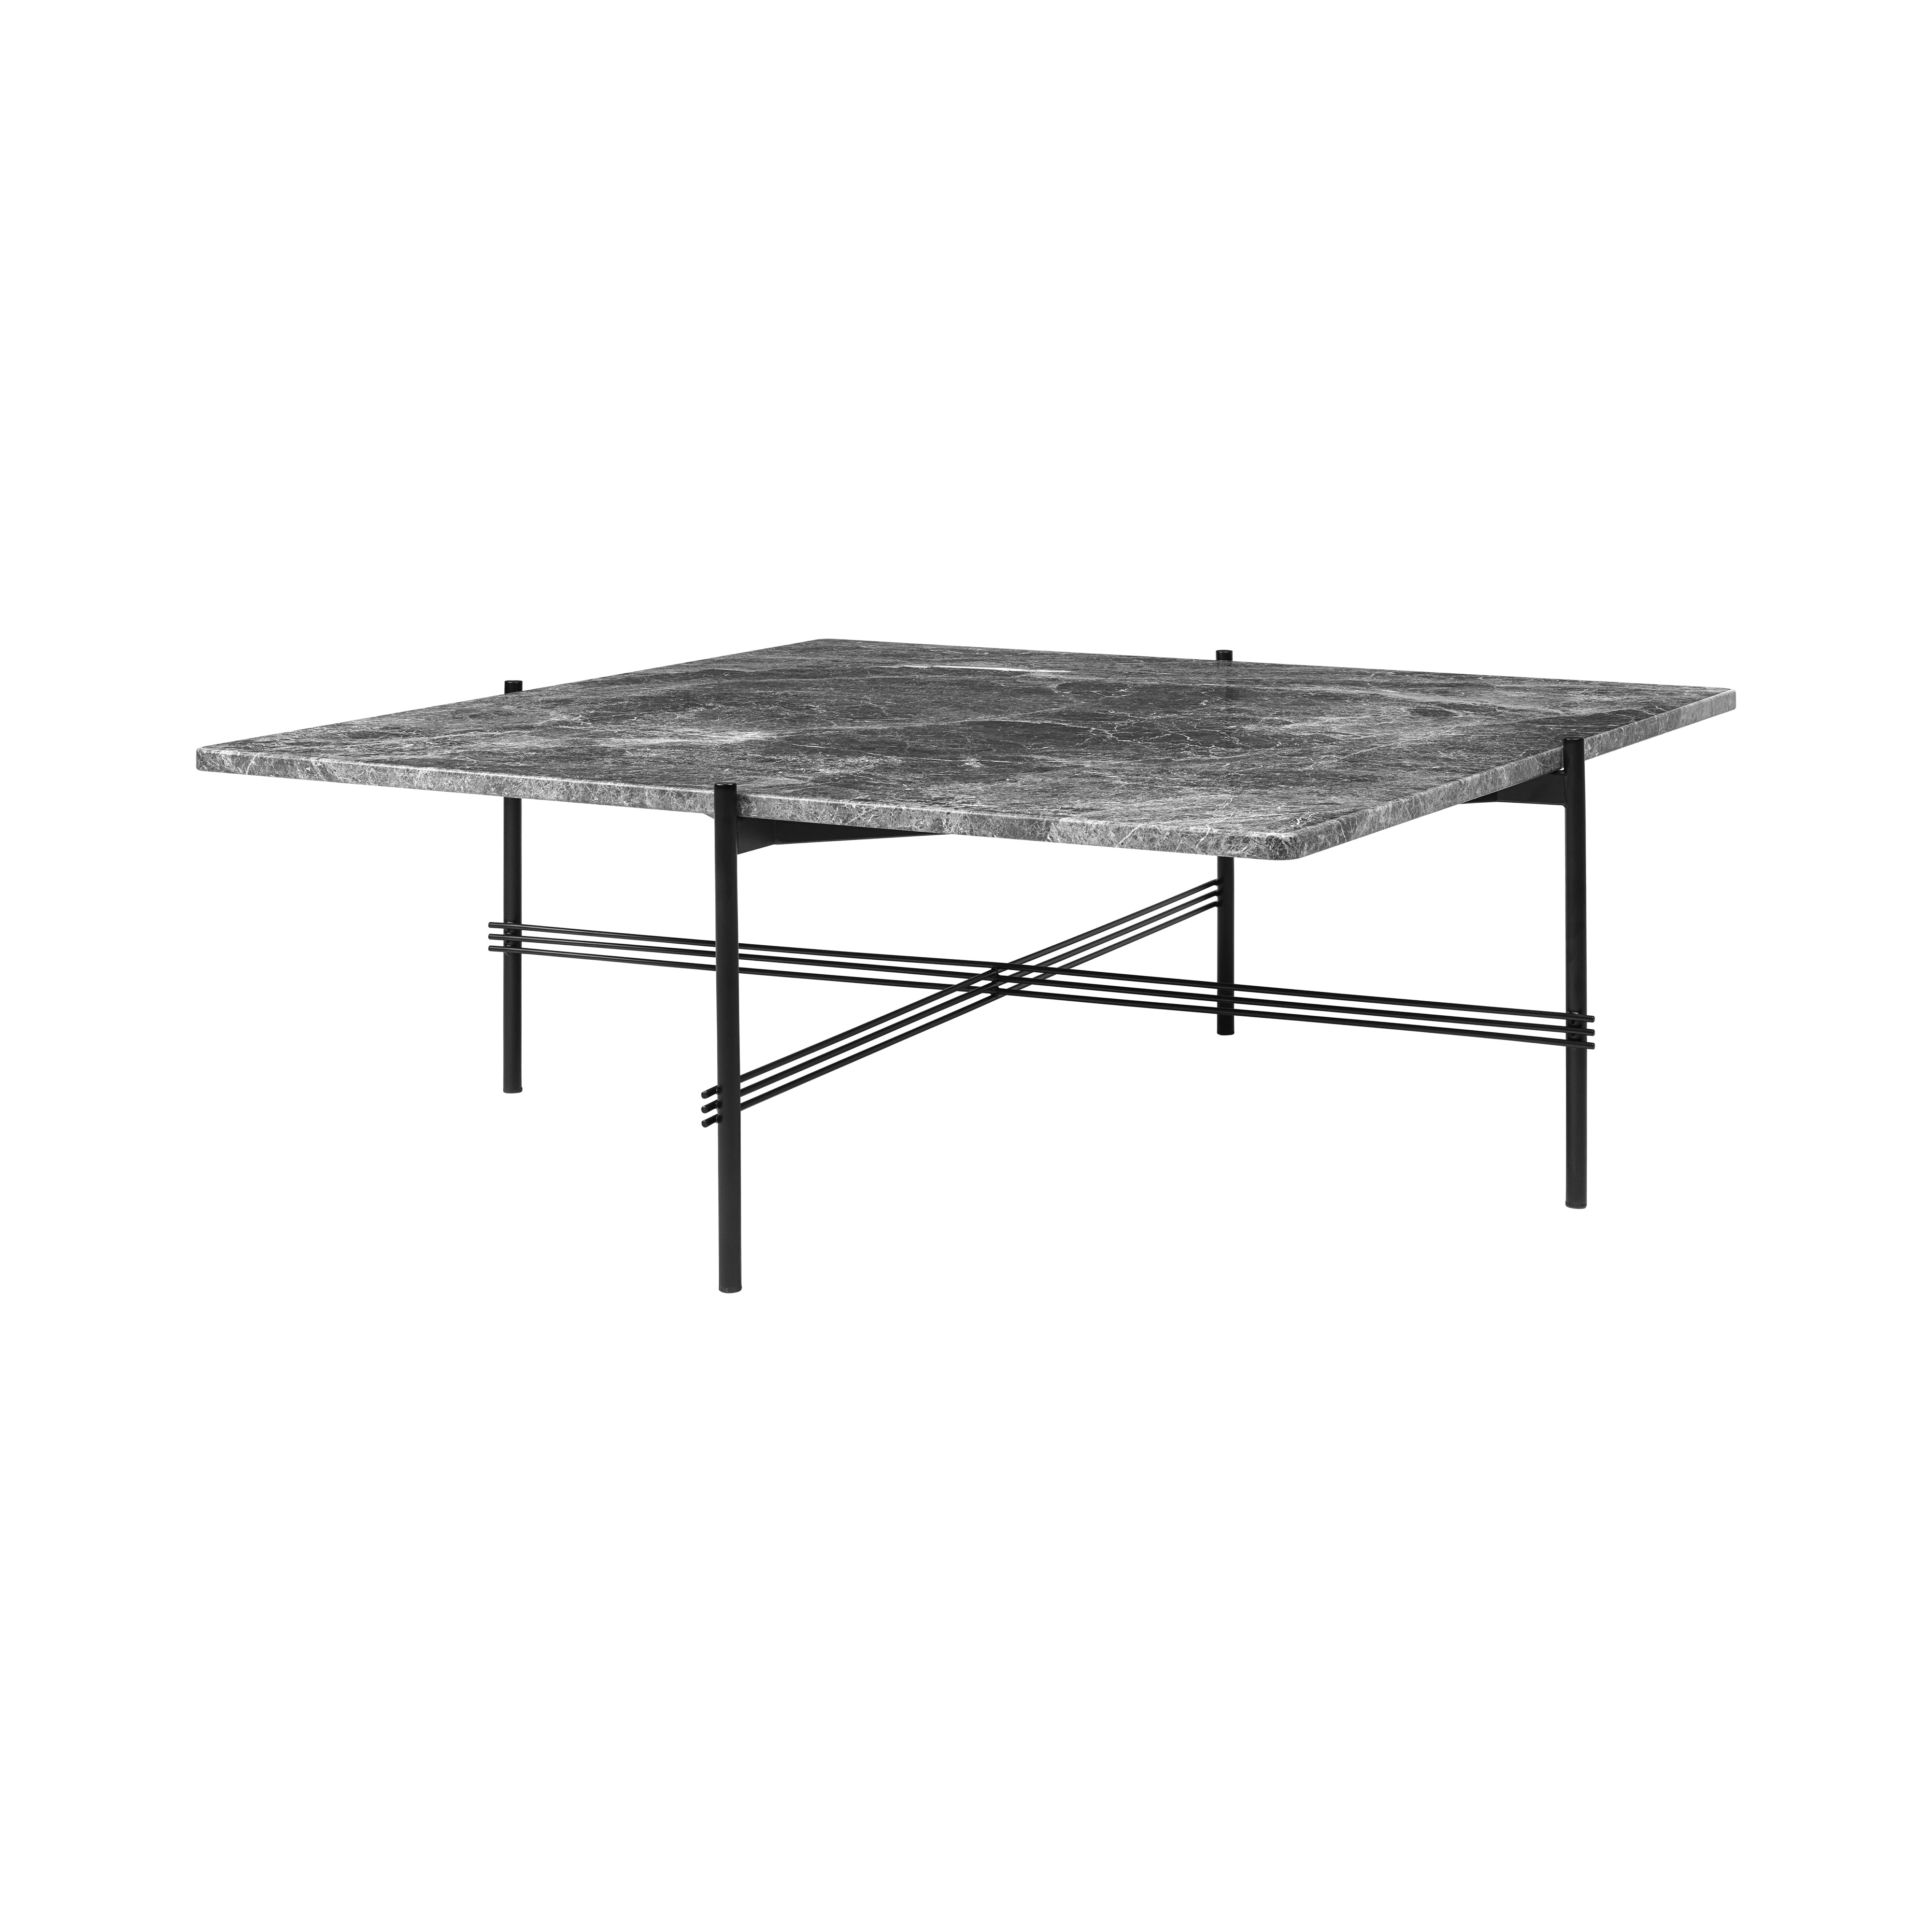 TS Square Coffee Table: Large - 41.3